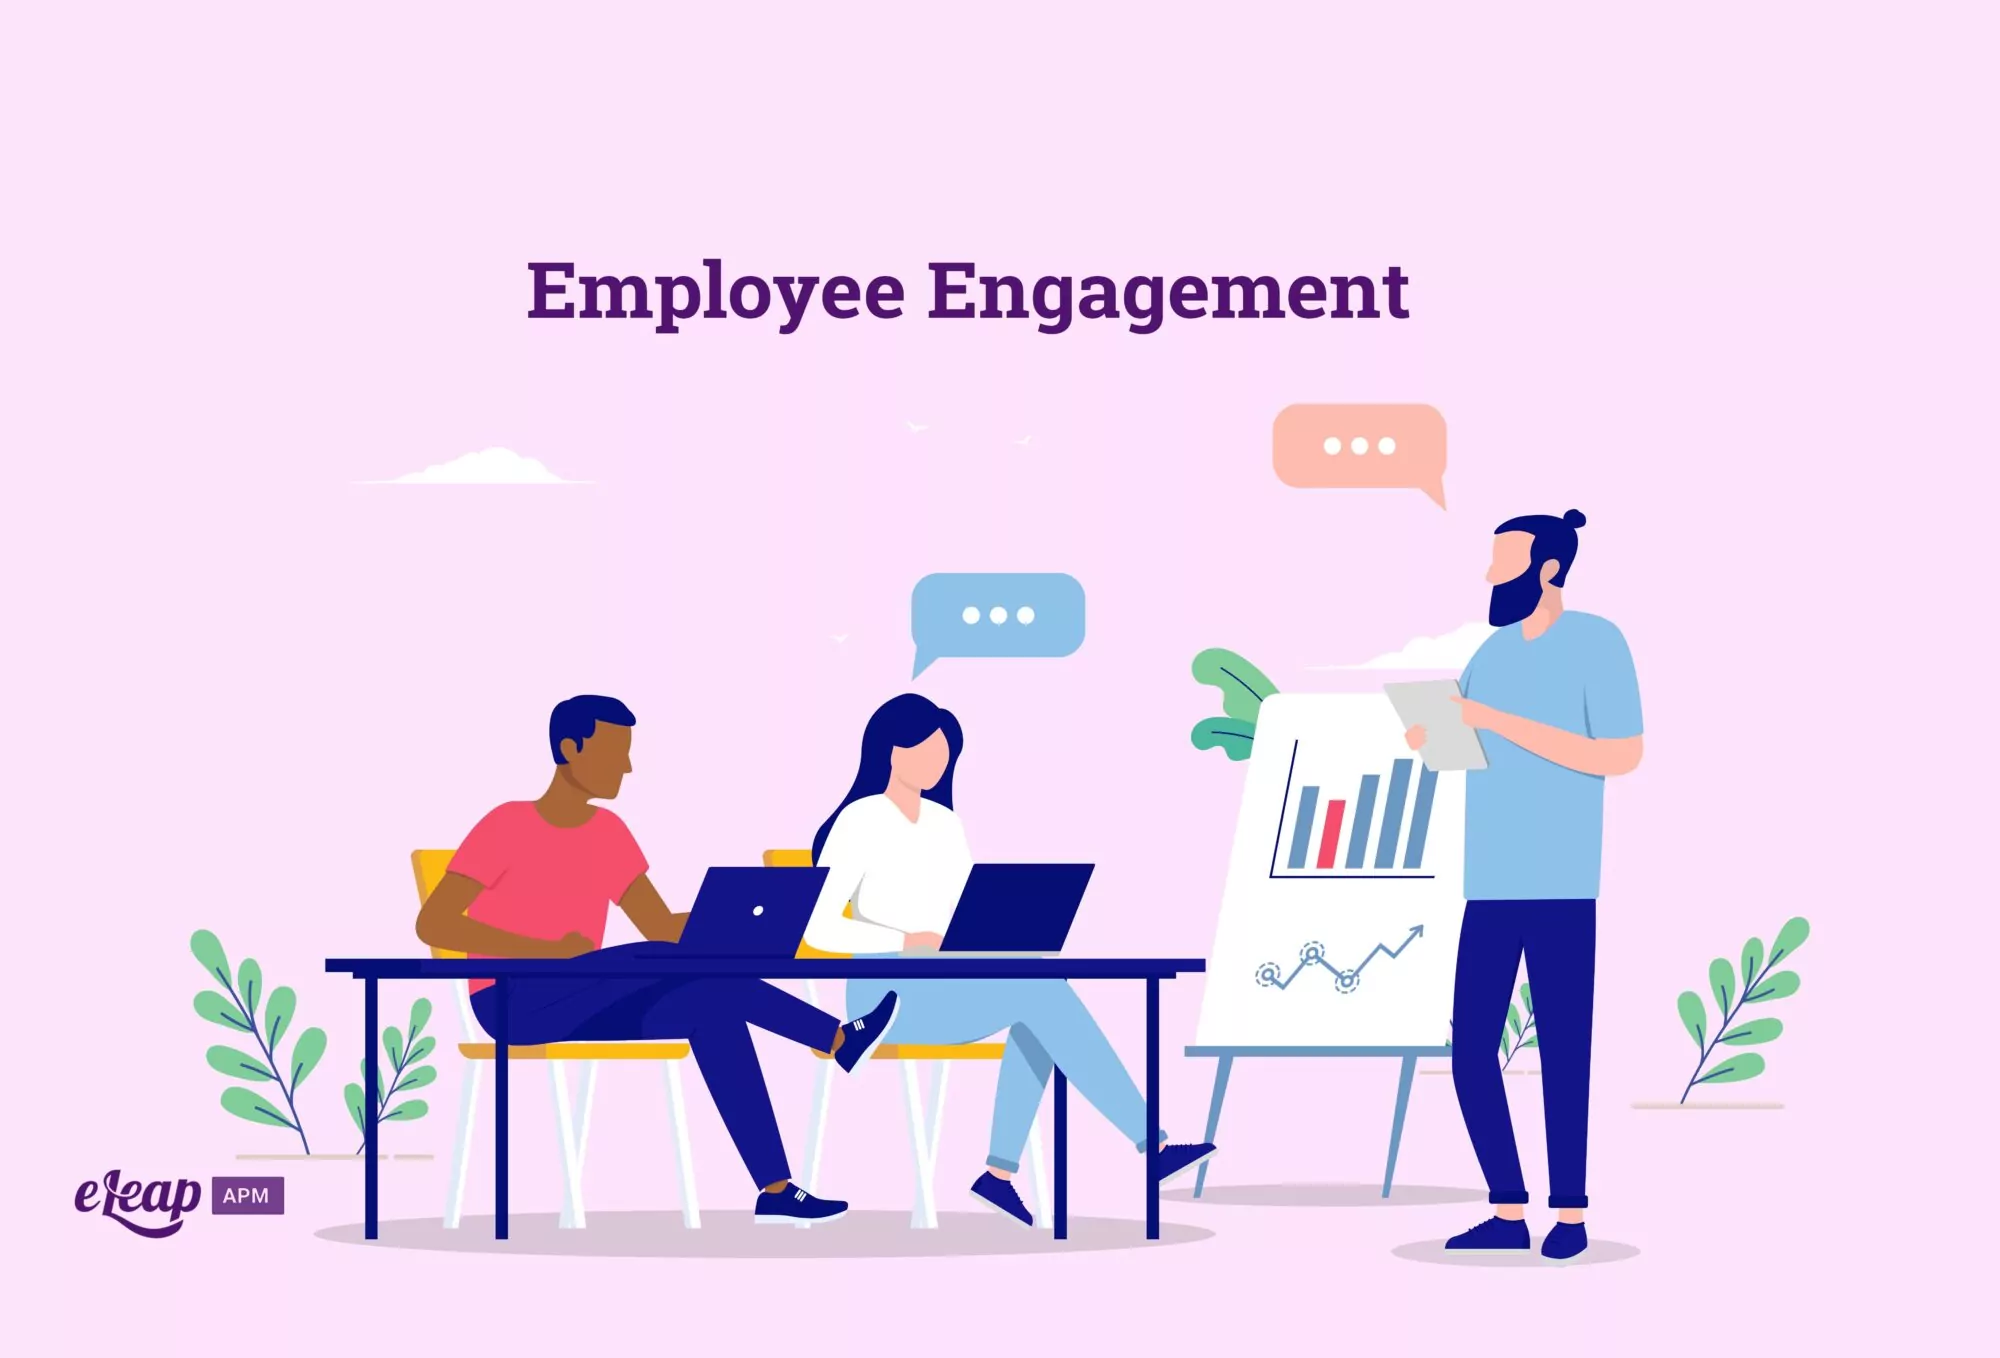 You must first identify and comprehend what employee engagement is to drive it effectively in your firm.